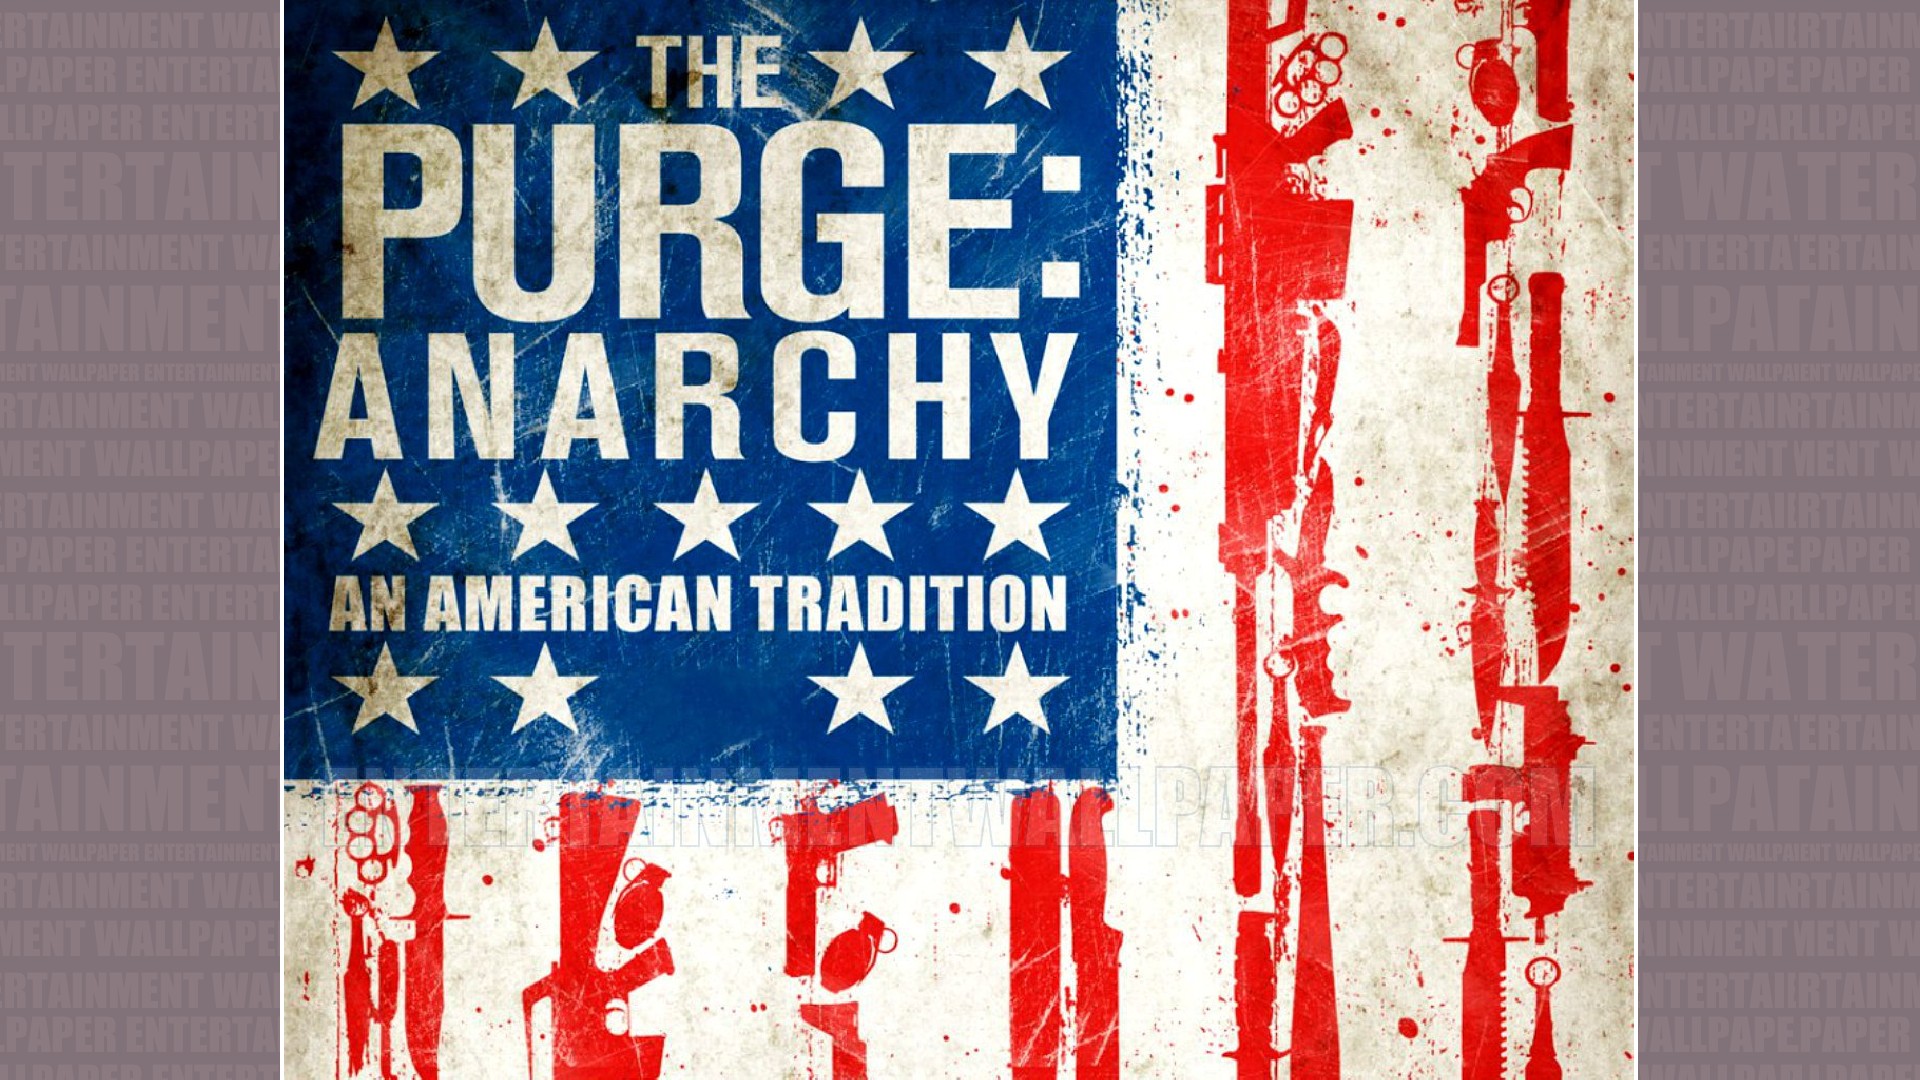  purge anarchy wallpaper 10043865 size 1920x1080 more the purge anarchy